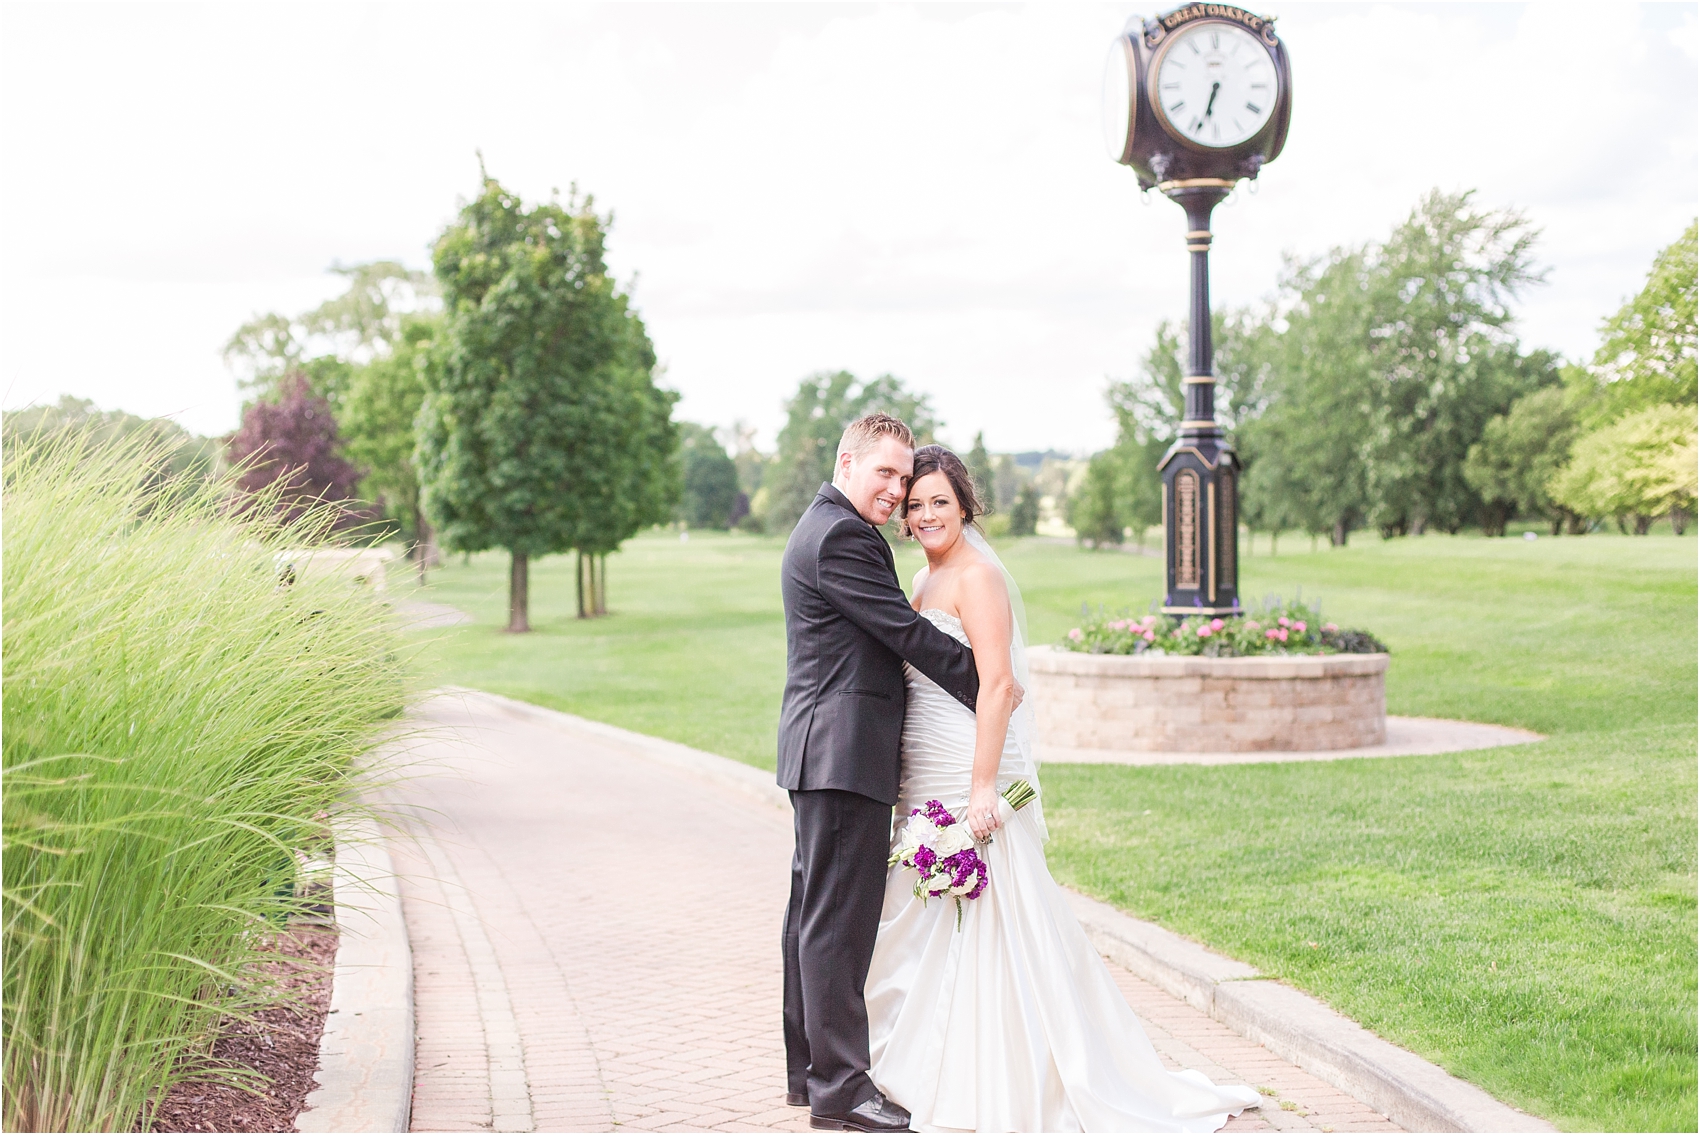 classic-wedding-photos-at-great-oaks-country-club-in-rochester-hills-mi-by-courtney-carolyn-photography_0112.jpg